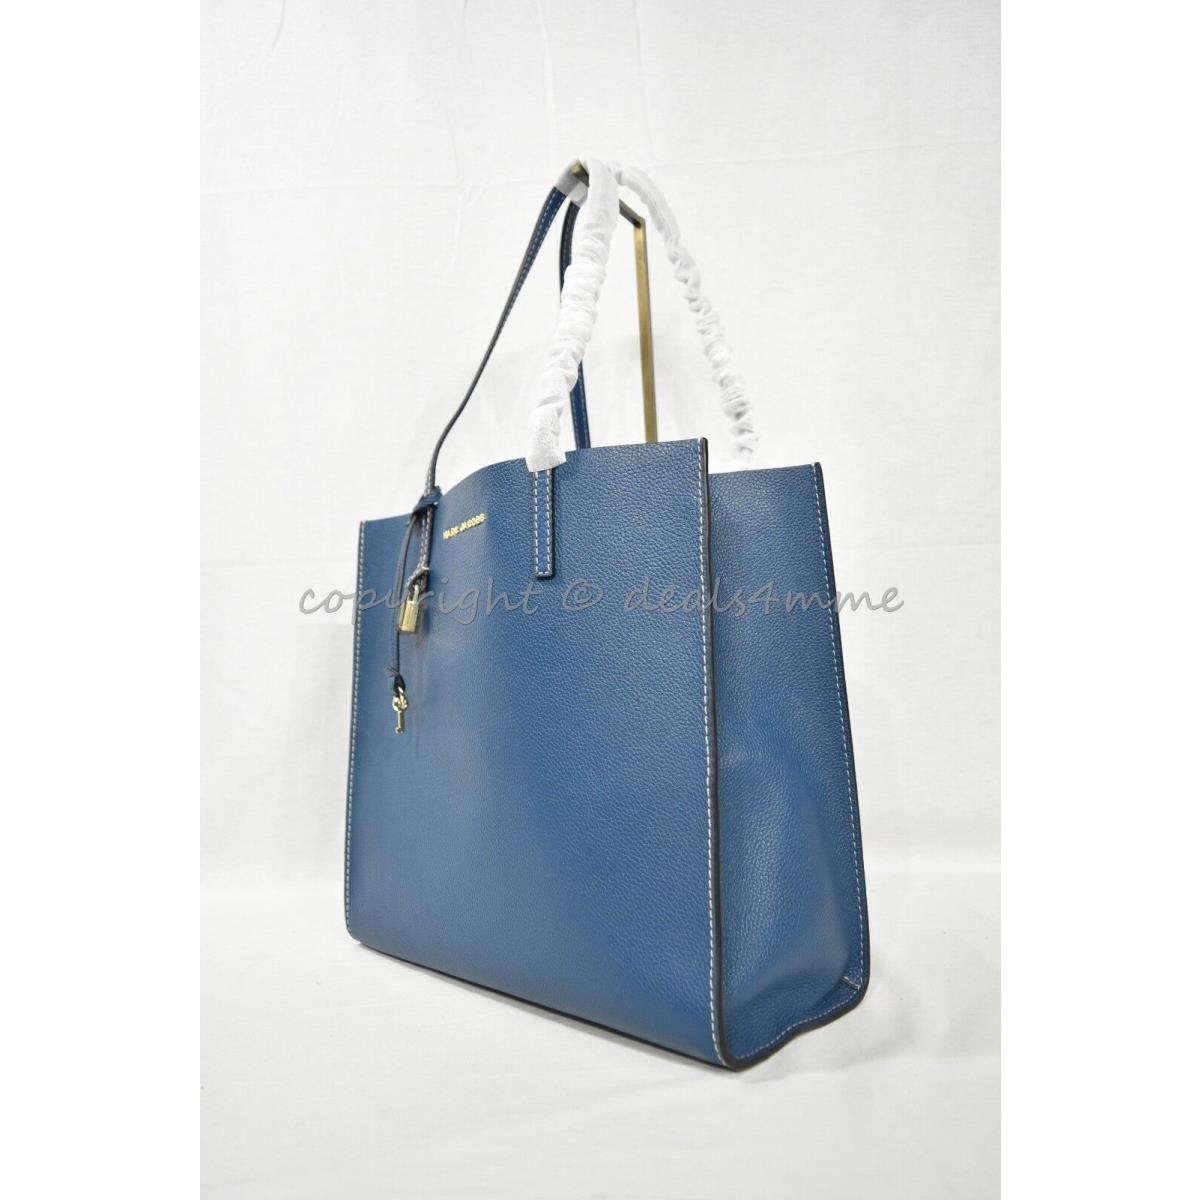 Marc By Marc Jacobs M0012669 The Grind East/west Leather Shopper Tote in Teal